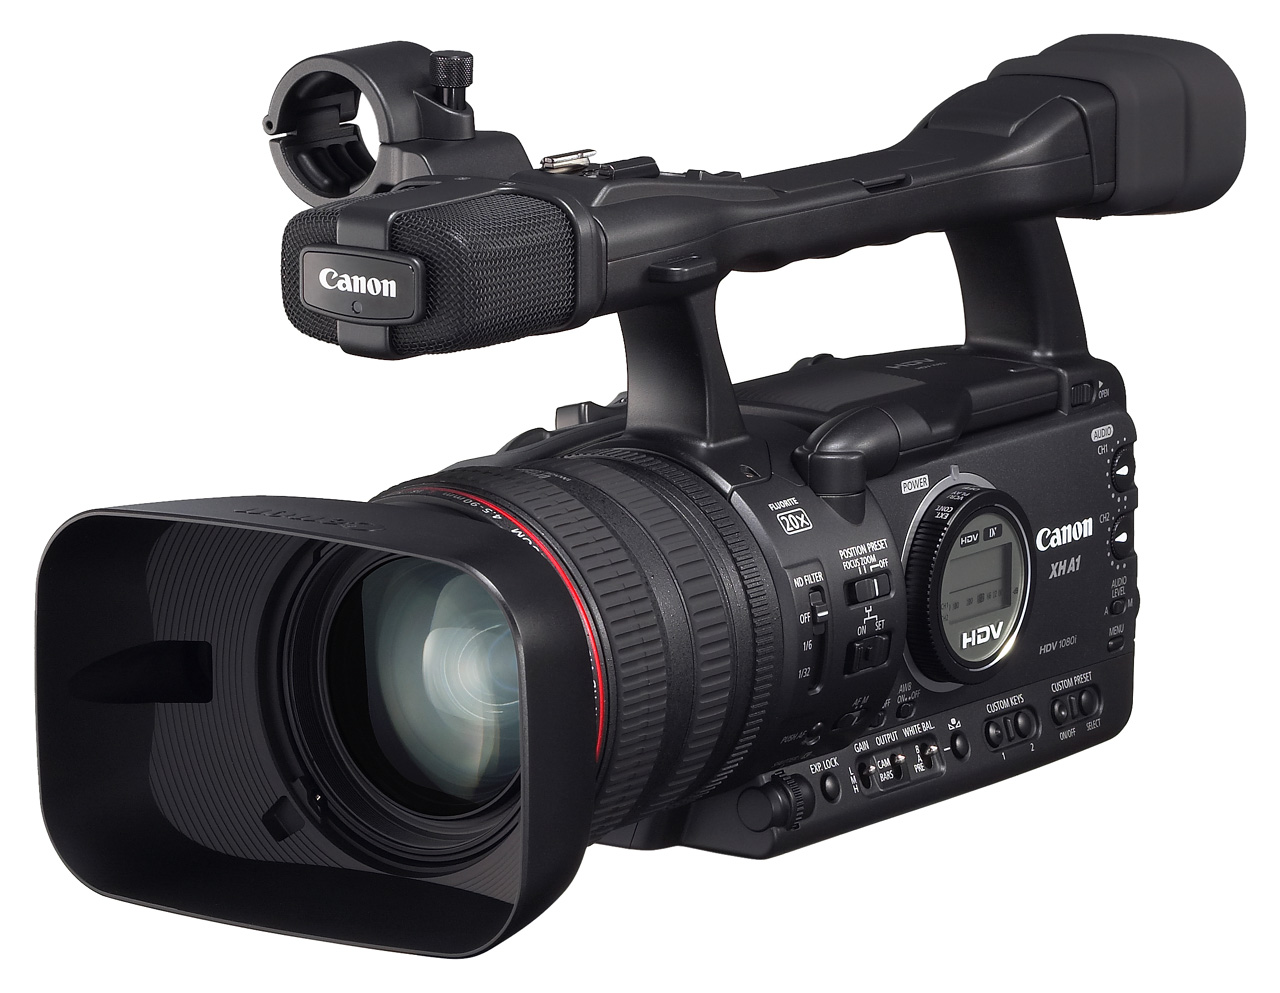 5 Crucial Features of the Best Videography Cameras | Techno FAQ